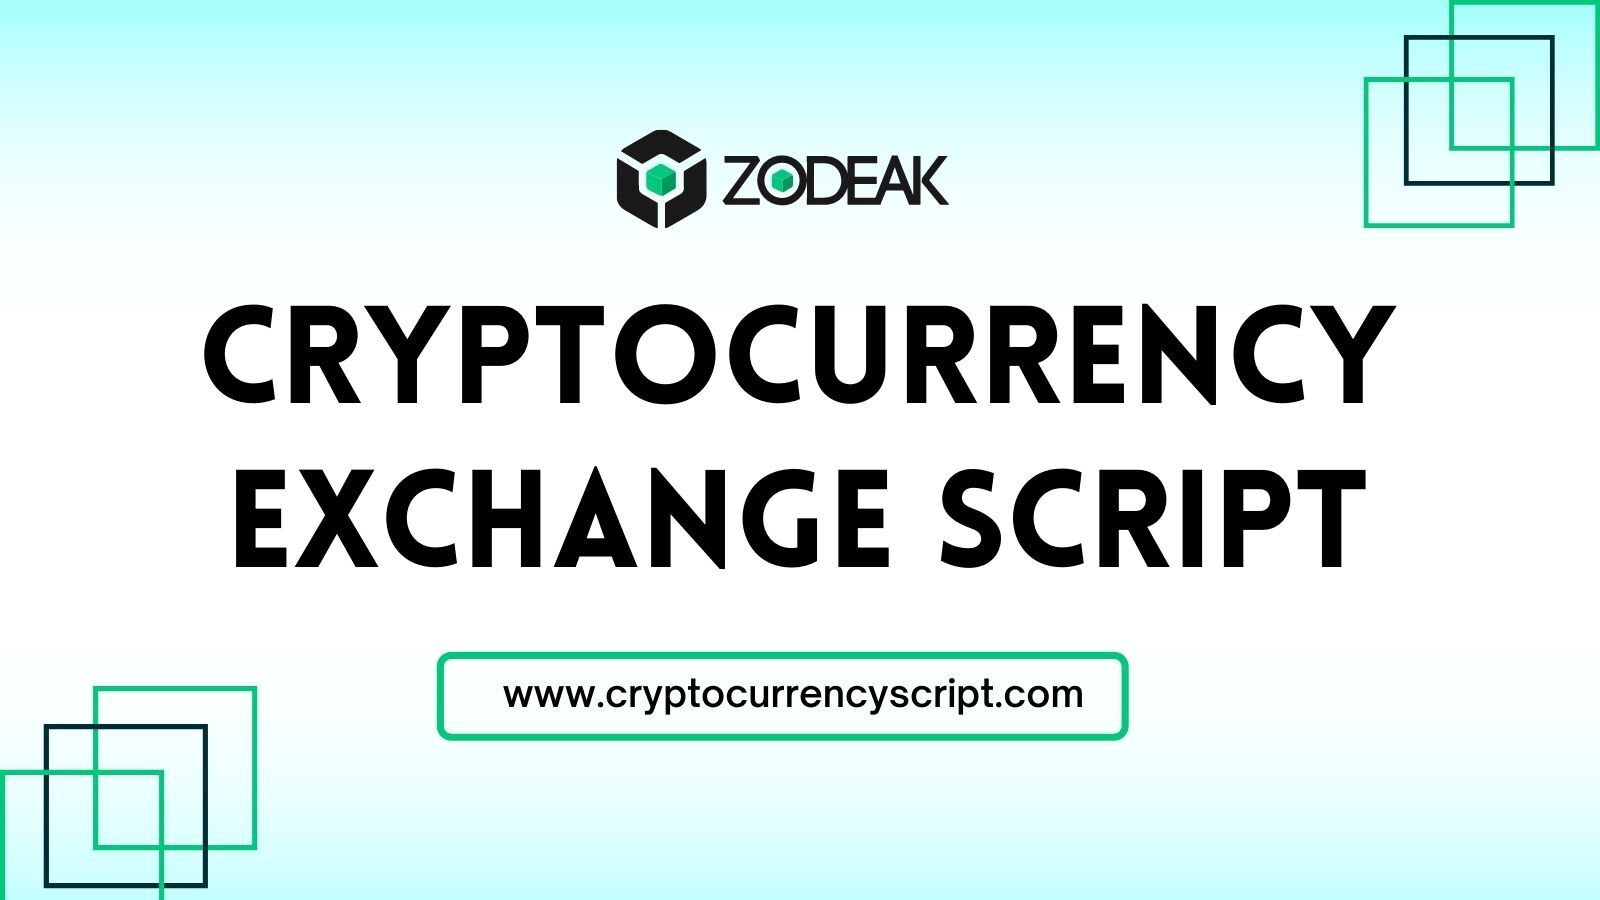 Cryptocurrency Trading Software | Zodeak